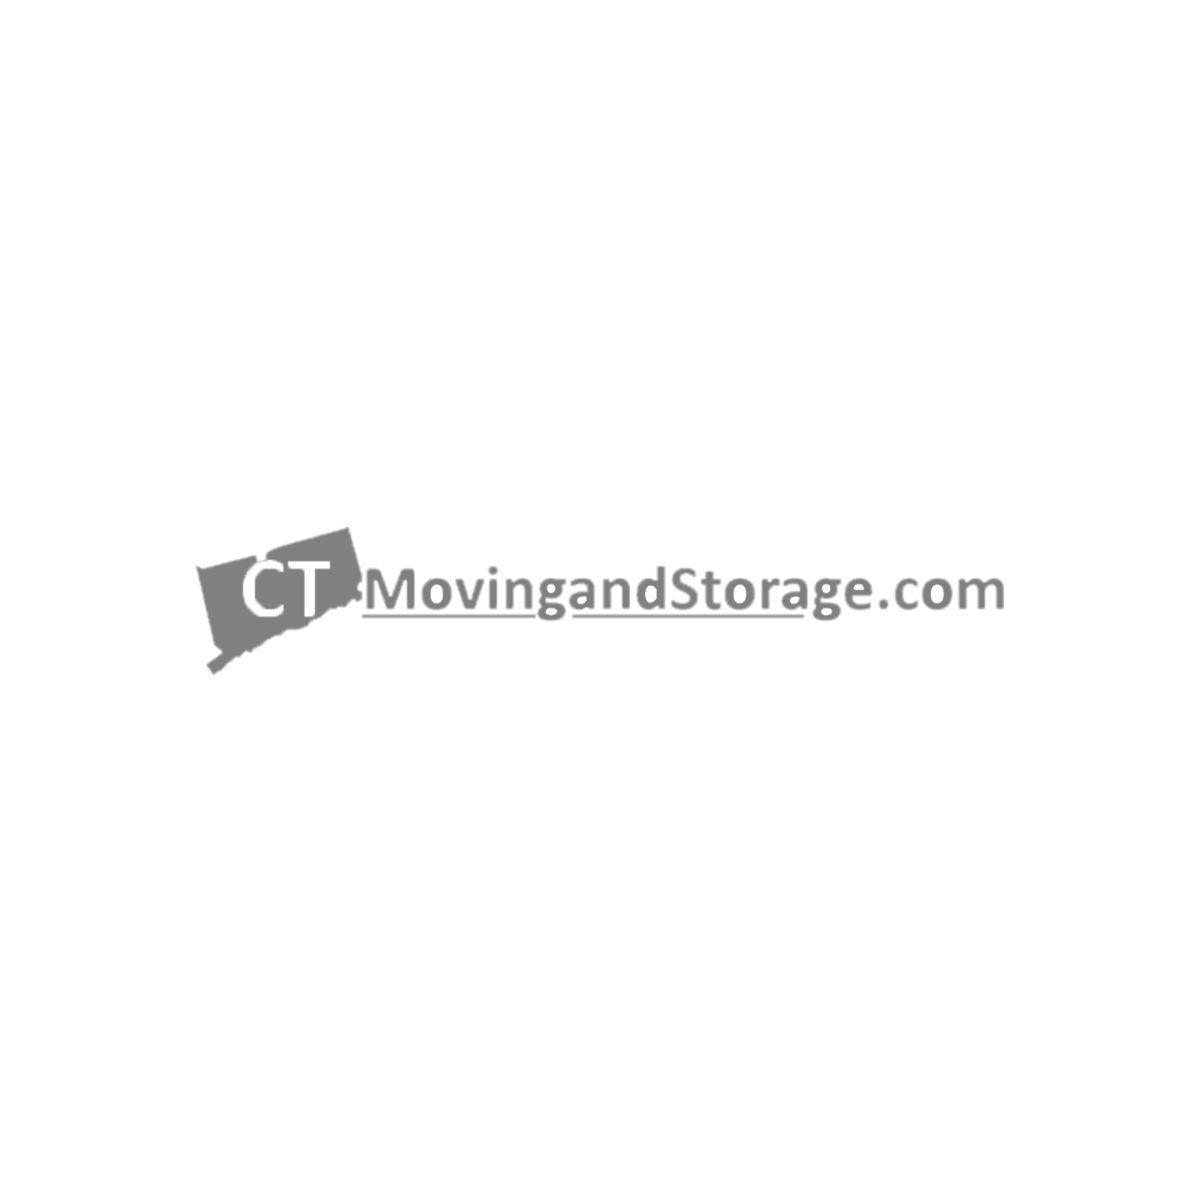 CT Moving and Storage logo 